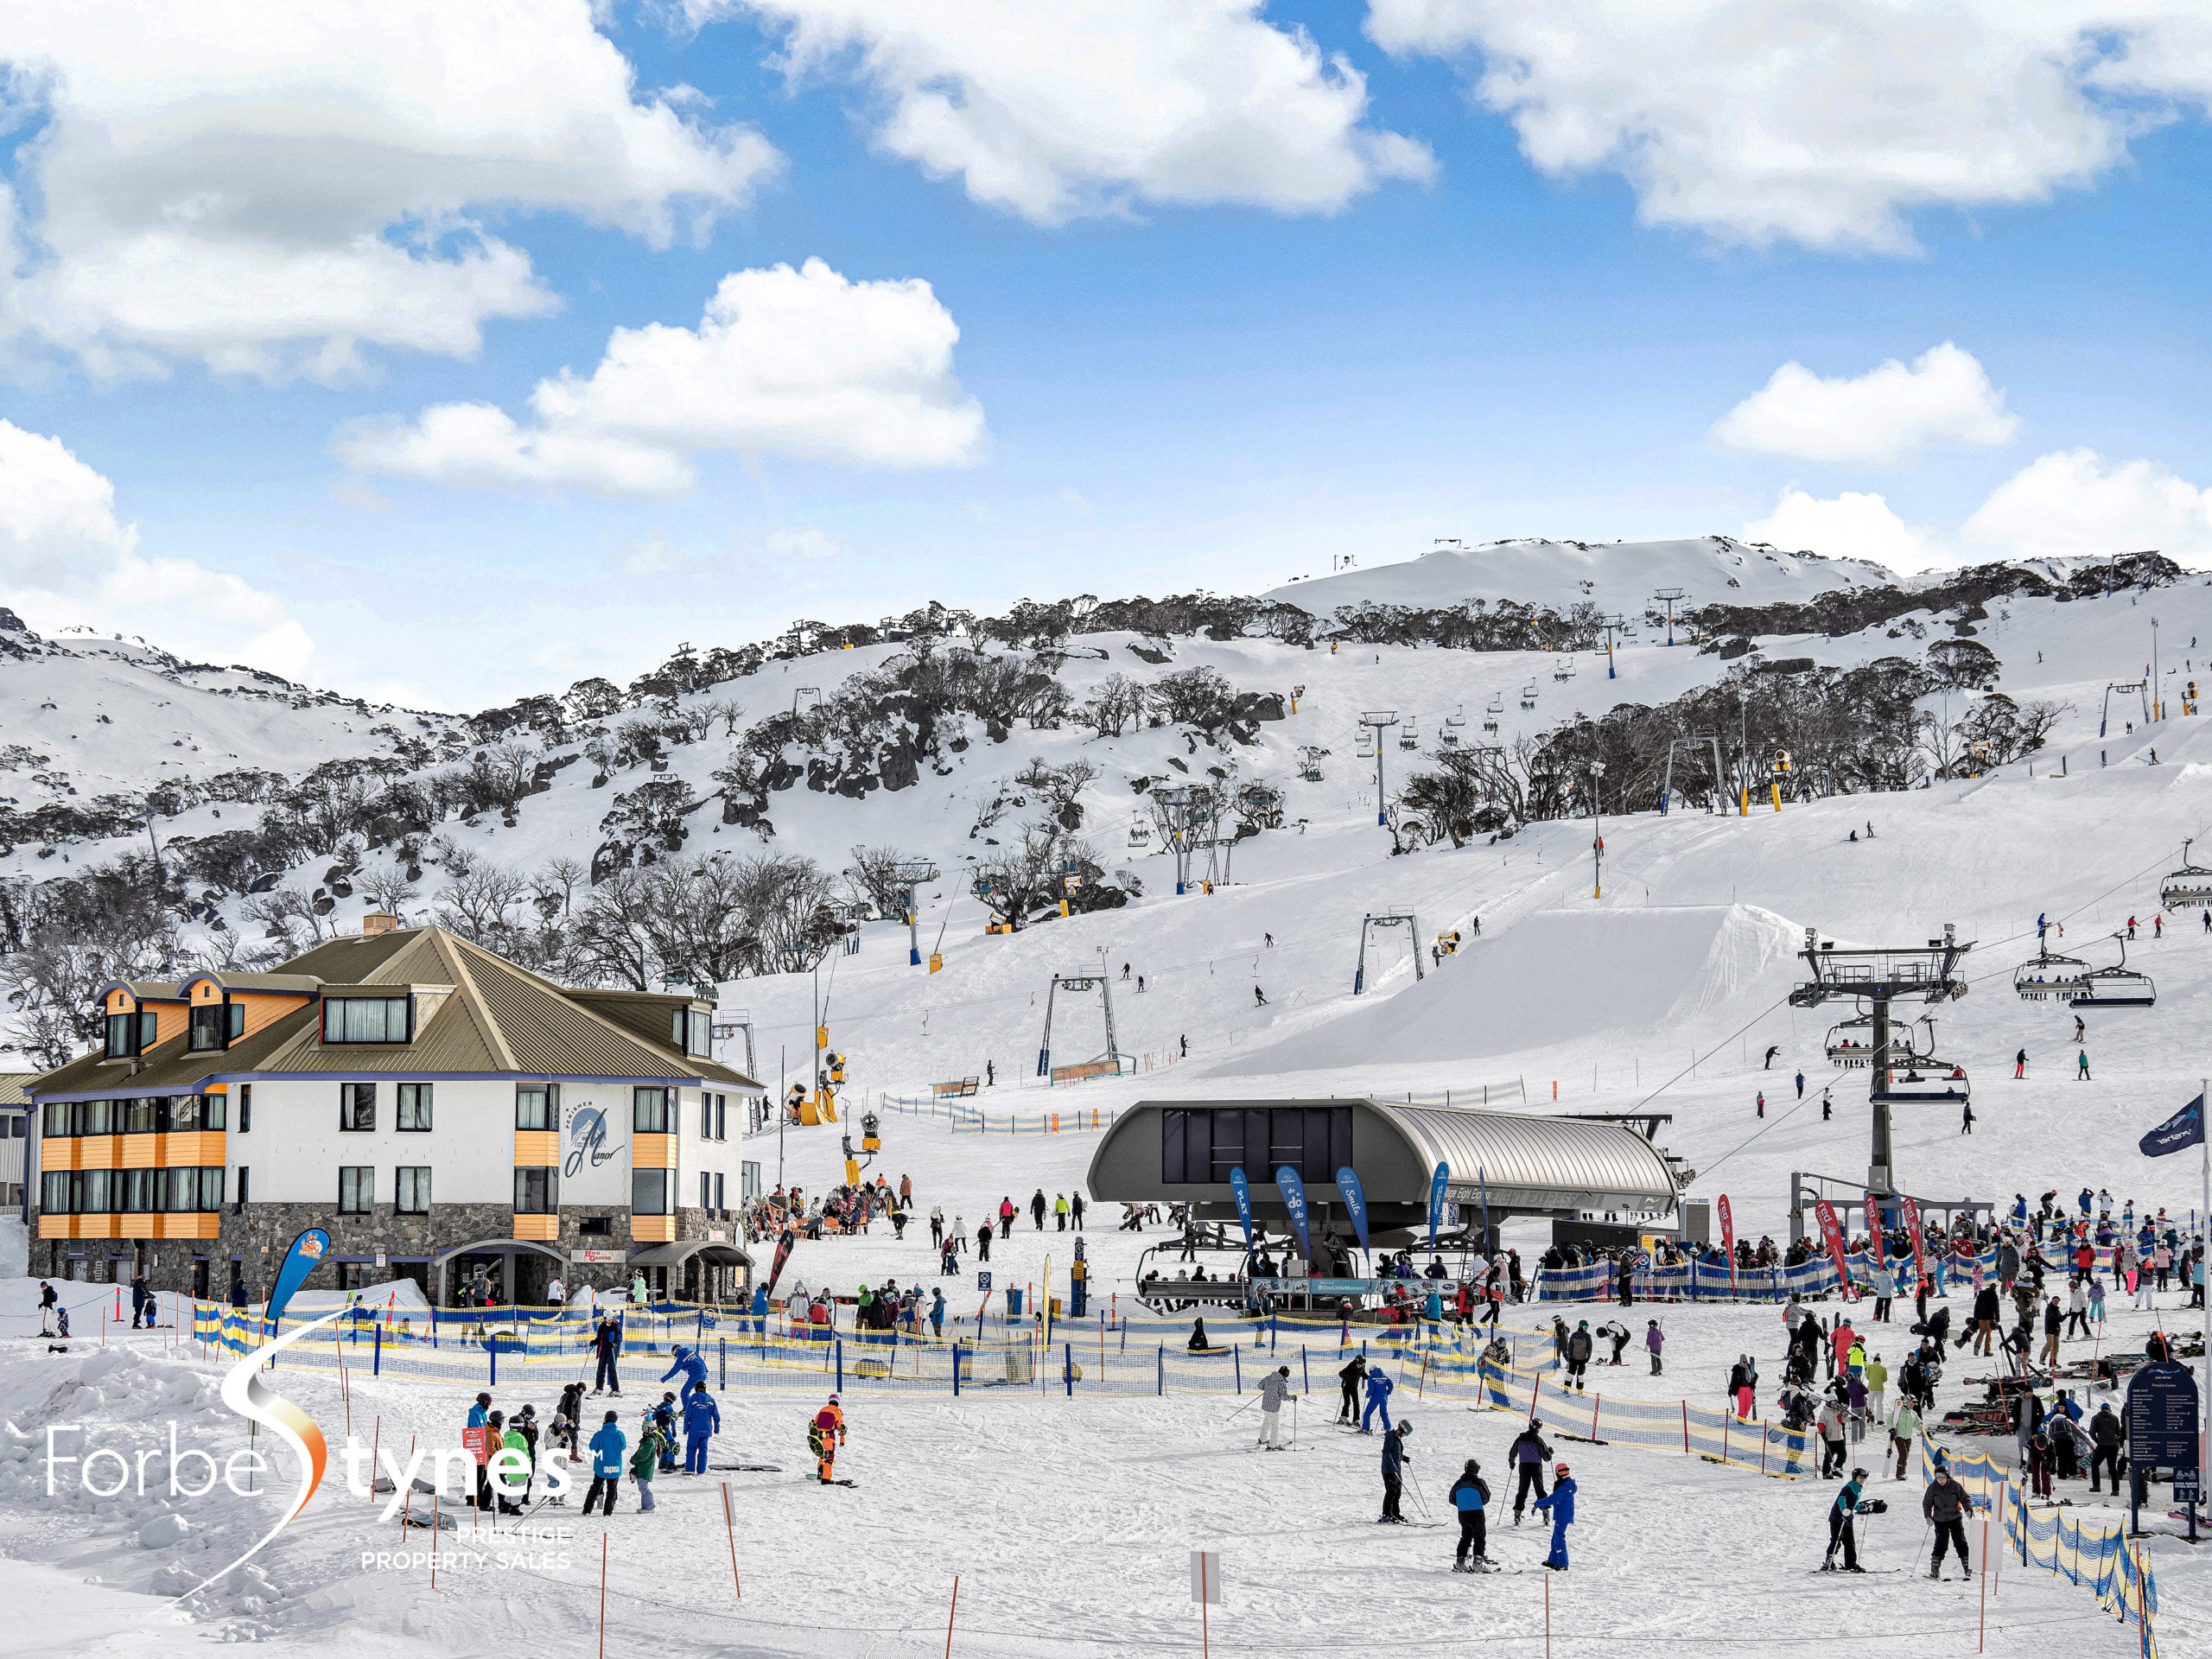 One of the largest Commercial Ski Hotels<br>The Perisher Manor<br>Expressions of Interest close 26th August 2022